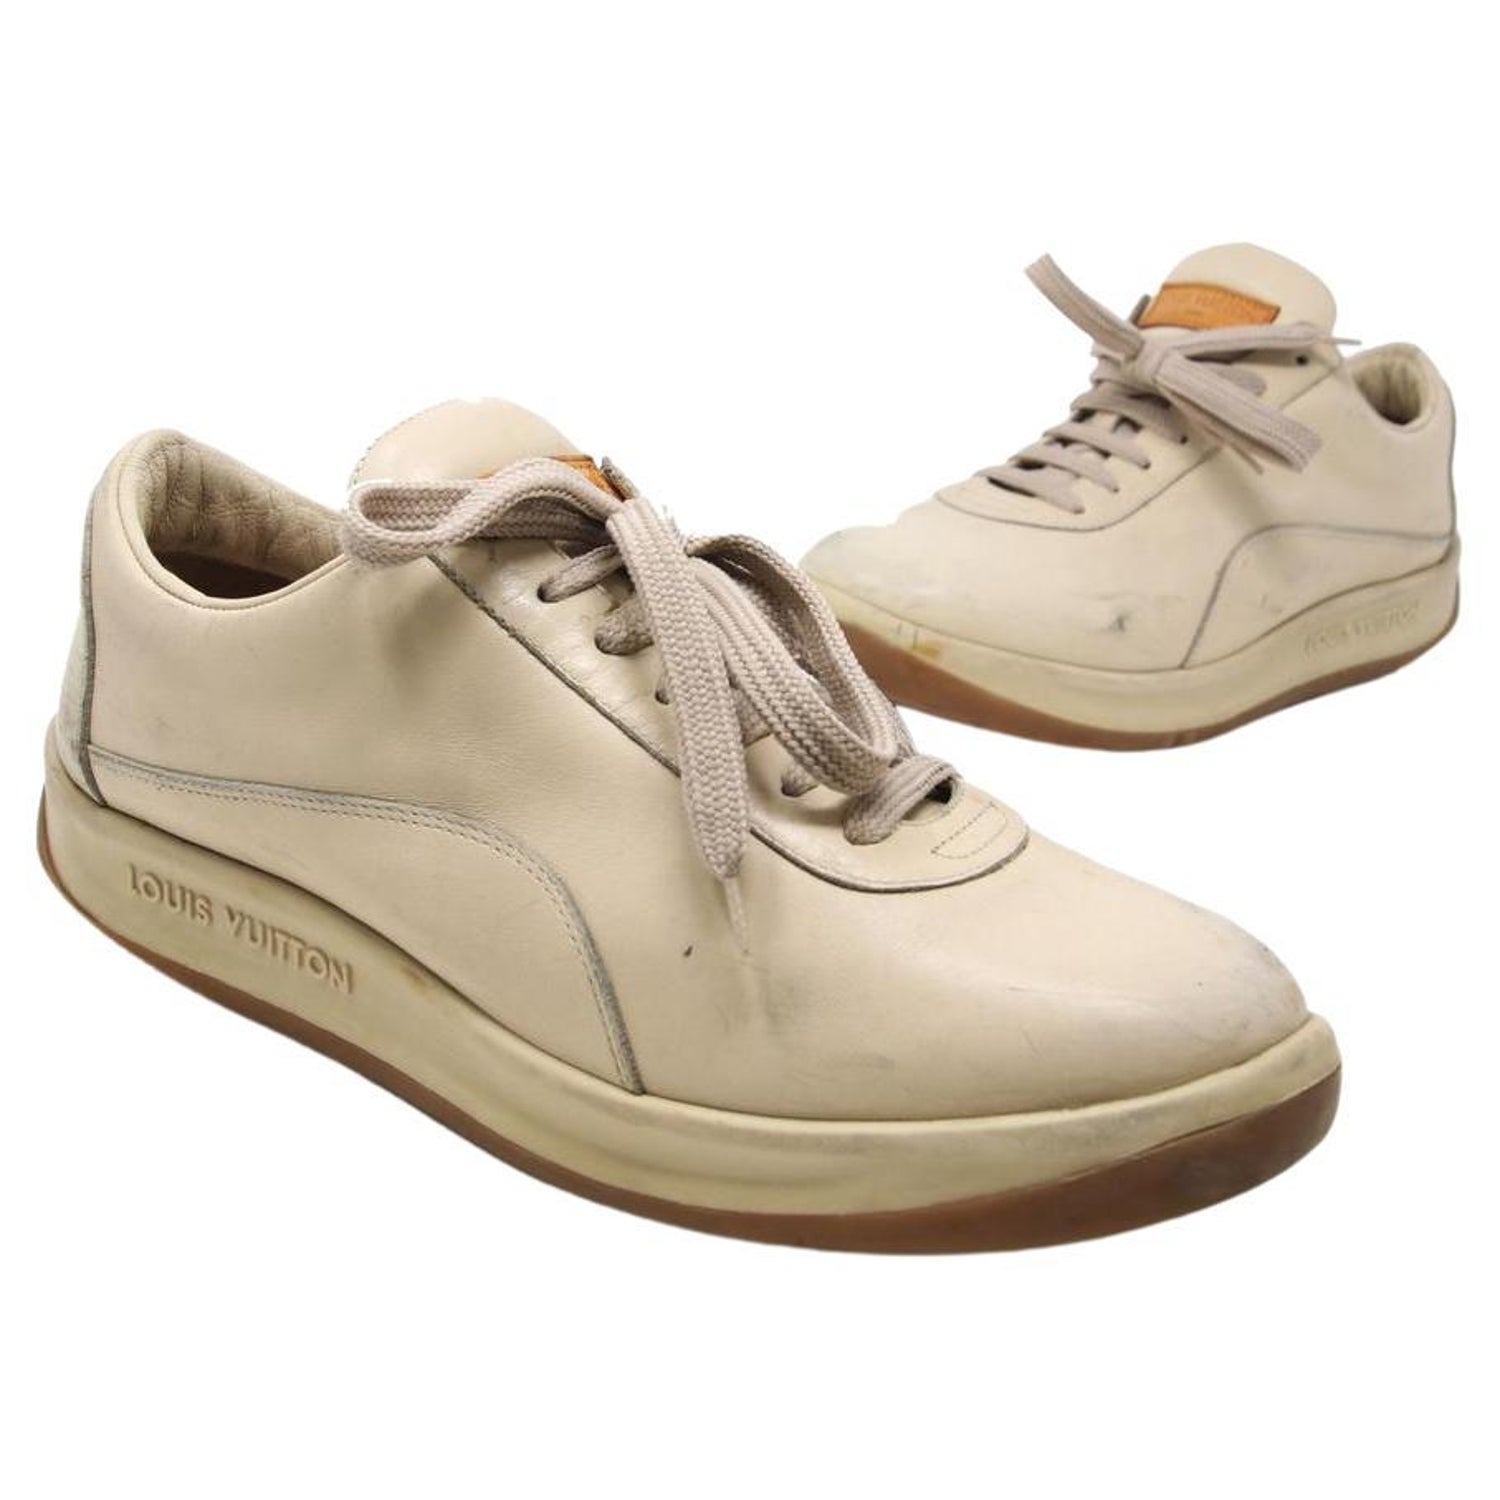 Louis Vuitton Sneakers Womens - 10 For Sale on 1stDibs  louis vuitton  sneakers for womens, louis vuitton shoes women's, louis vuitton tennis shoes  for ladies